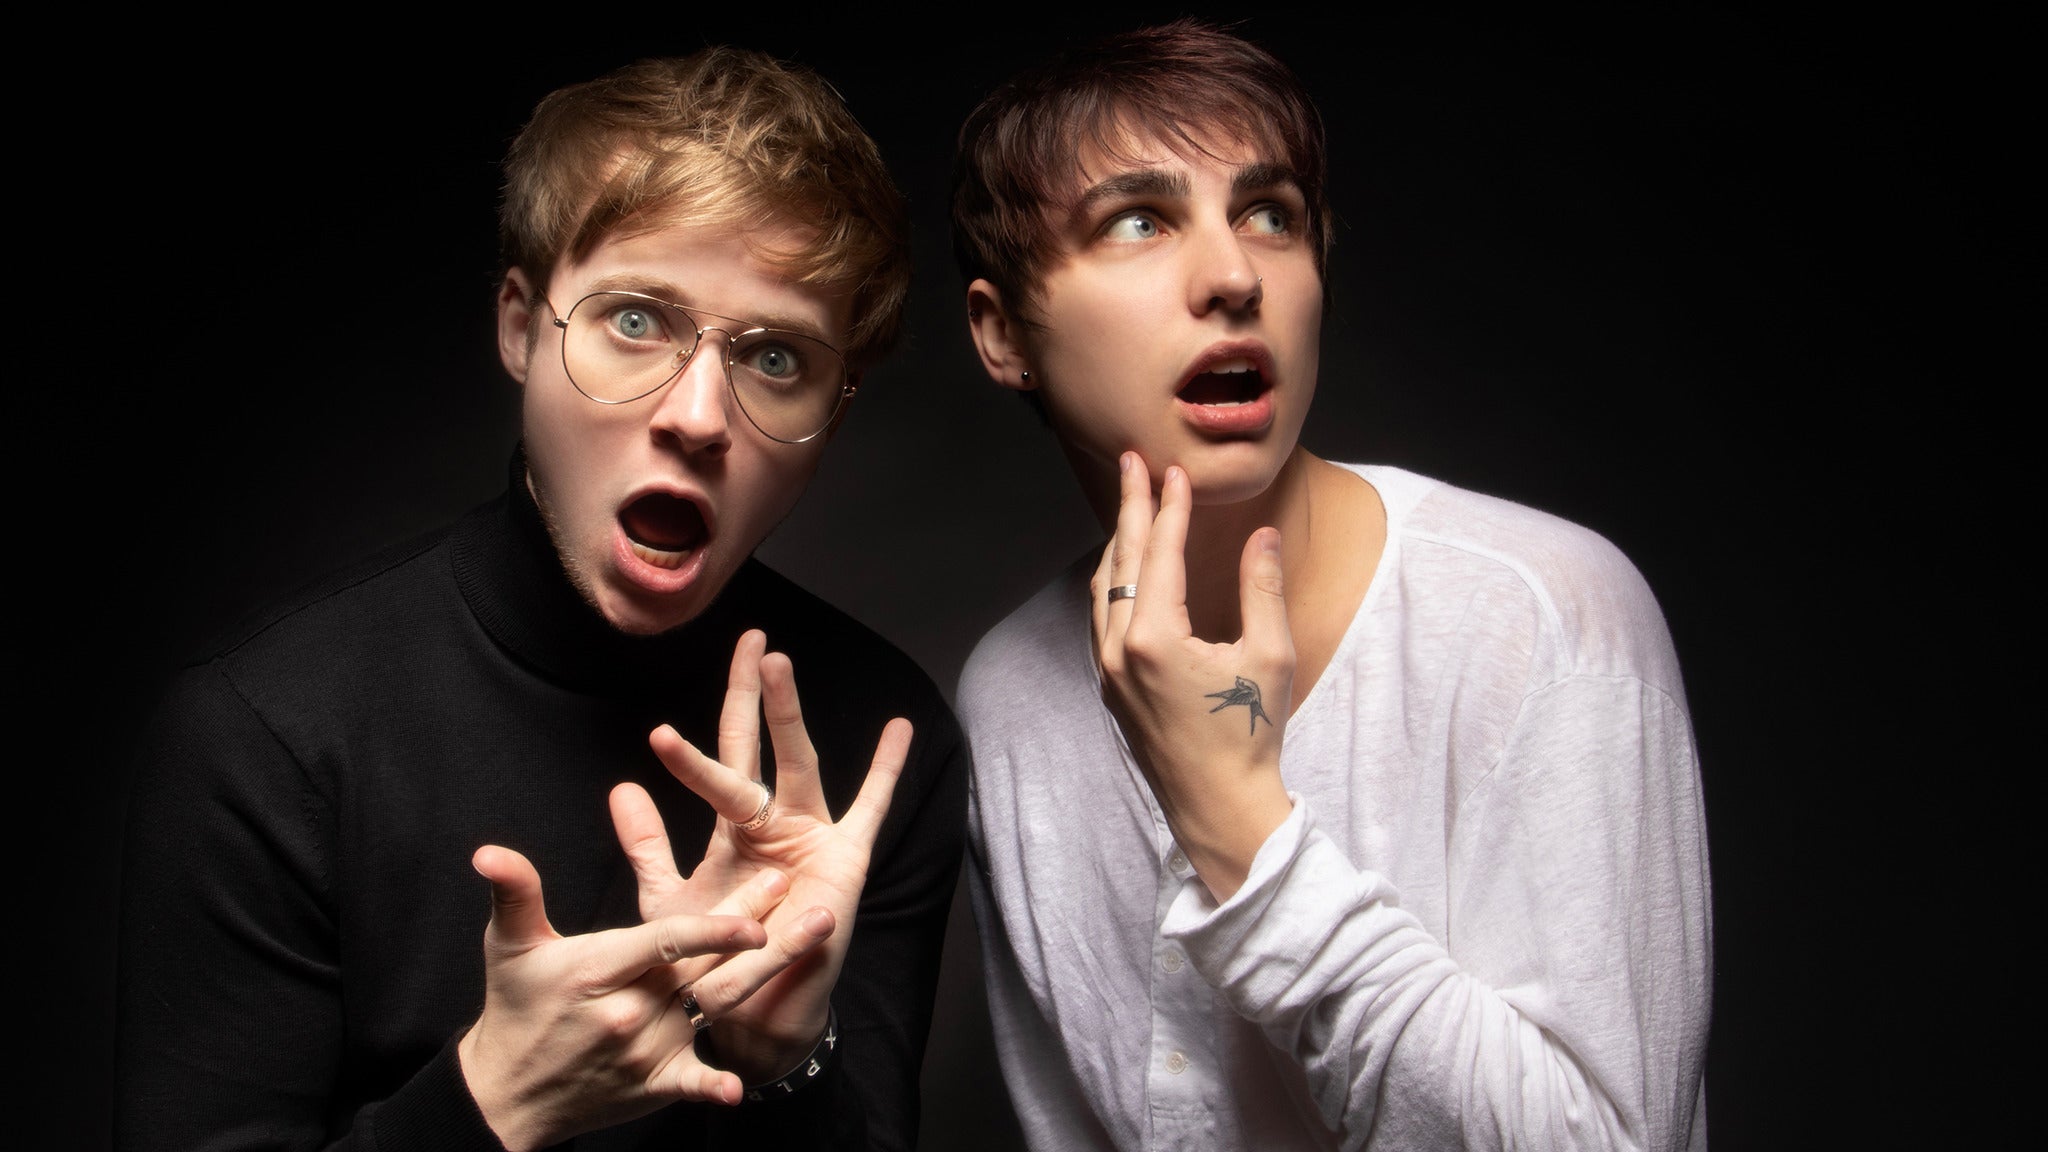 All In One Tour Sam And Colby Tickets Tour Look